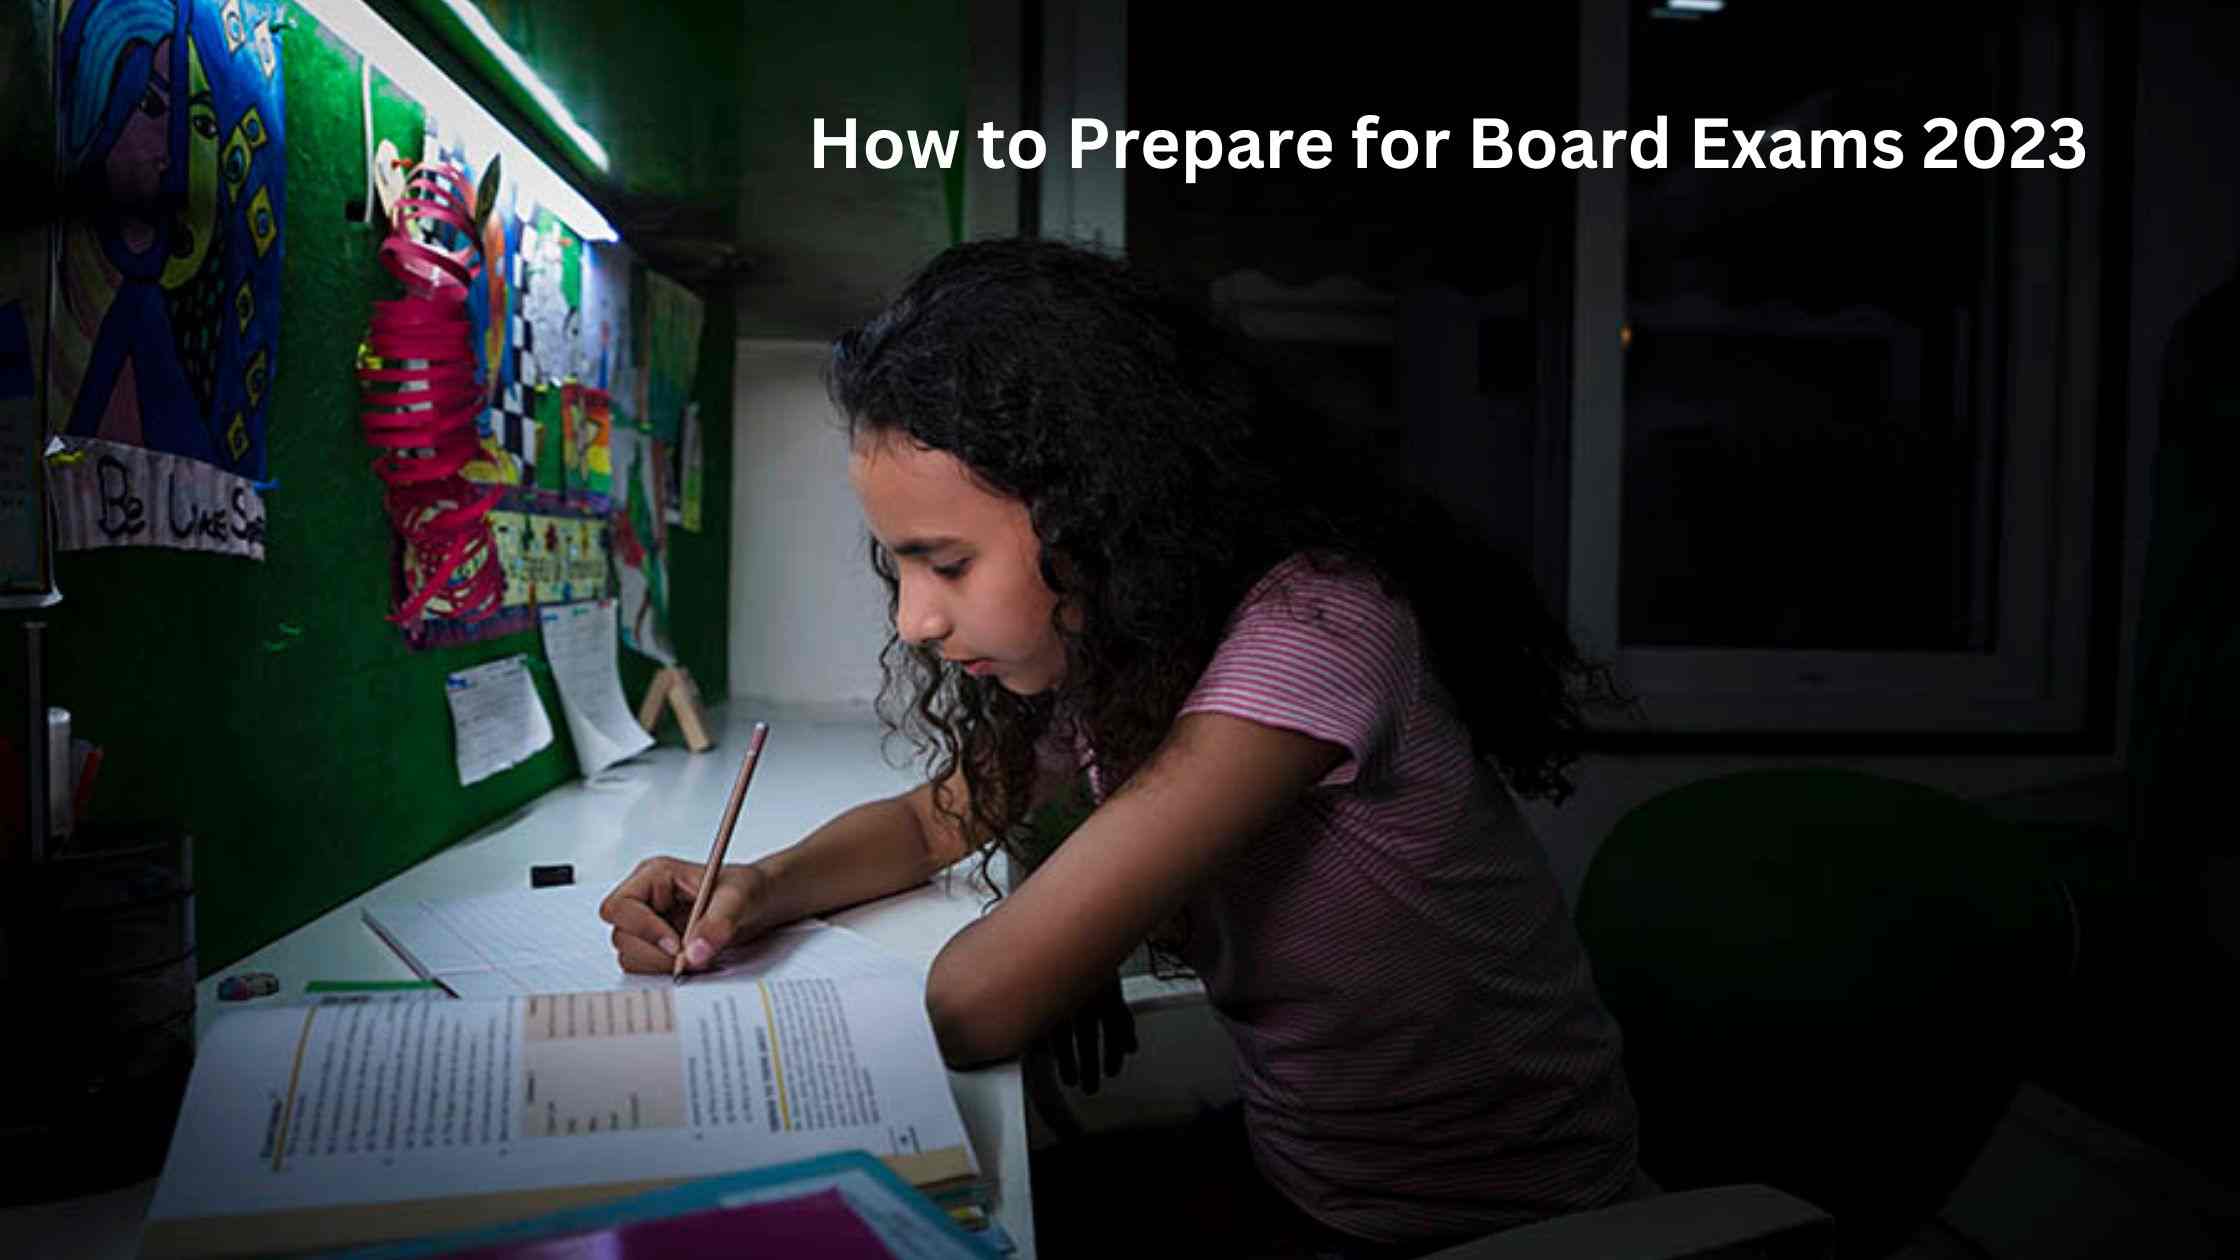 How to Prepare for Board Exams 2023